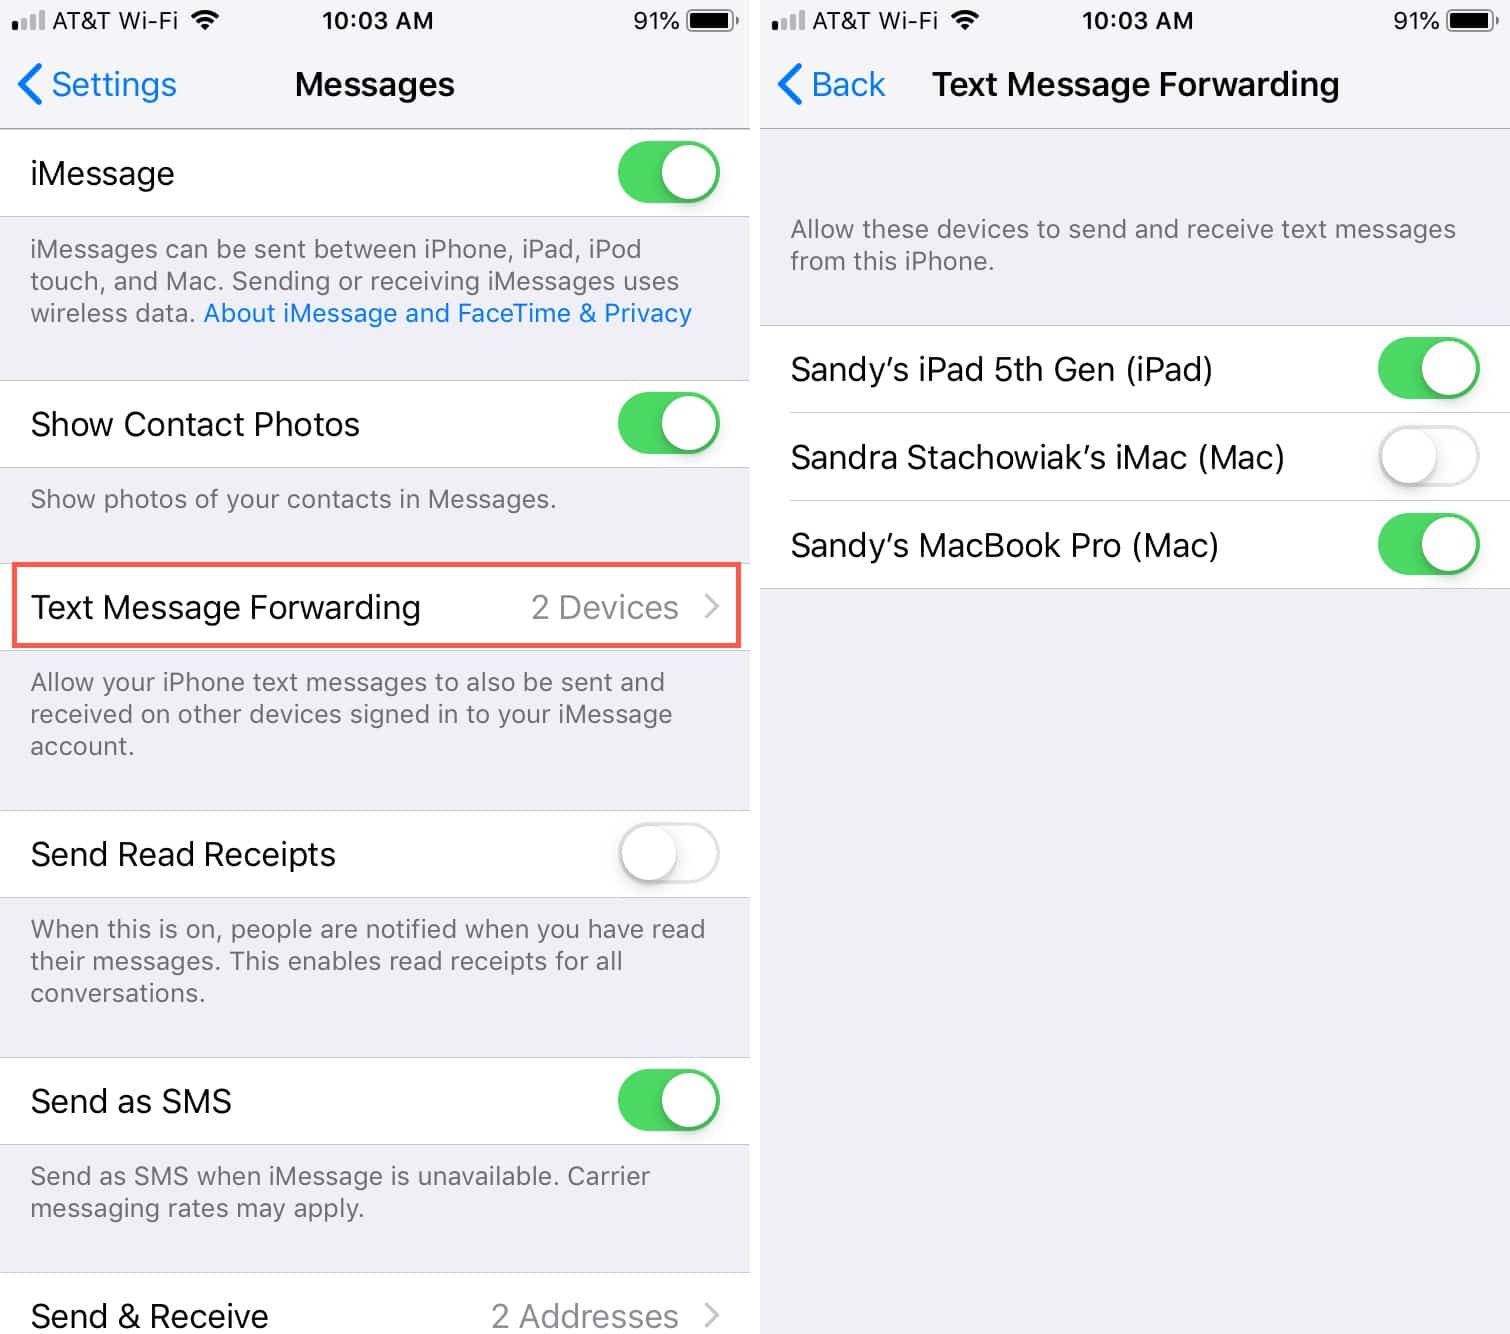 How to send and receive SMS text messages on iPad and Mac